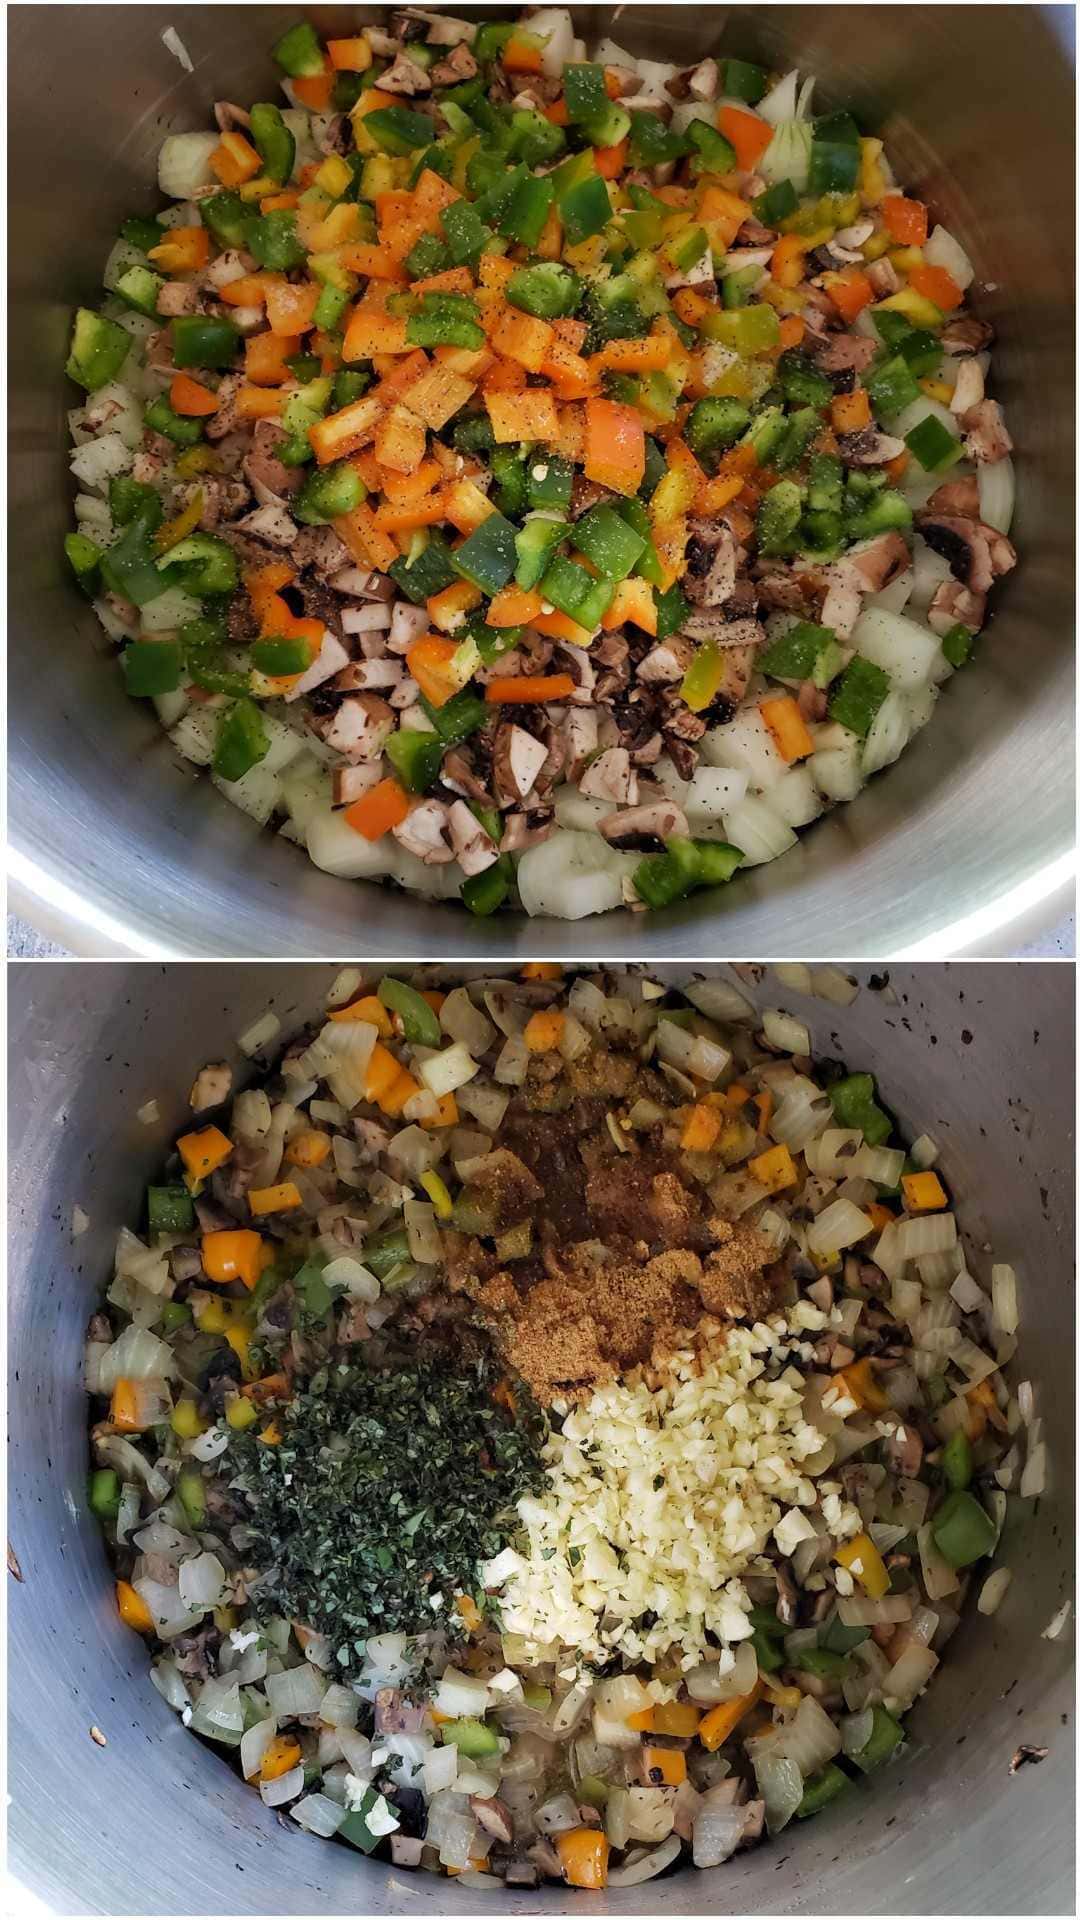 A two way image collage, the first image shows the onions, mushroom, and bell peppers starting to sauté along with a little salt and pepper. The second image shows the vegetables after they have cooked for a few minutes, fresh oregano, garlic, and seasonings have also been added to the top of the sauté. 